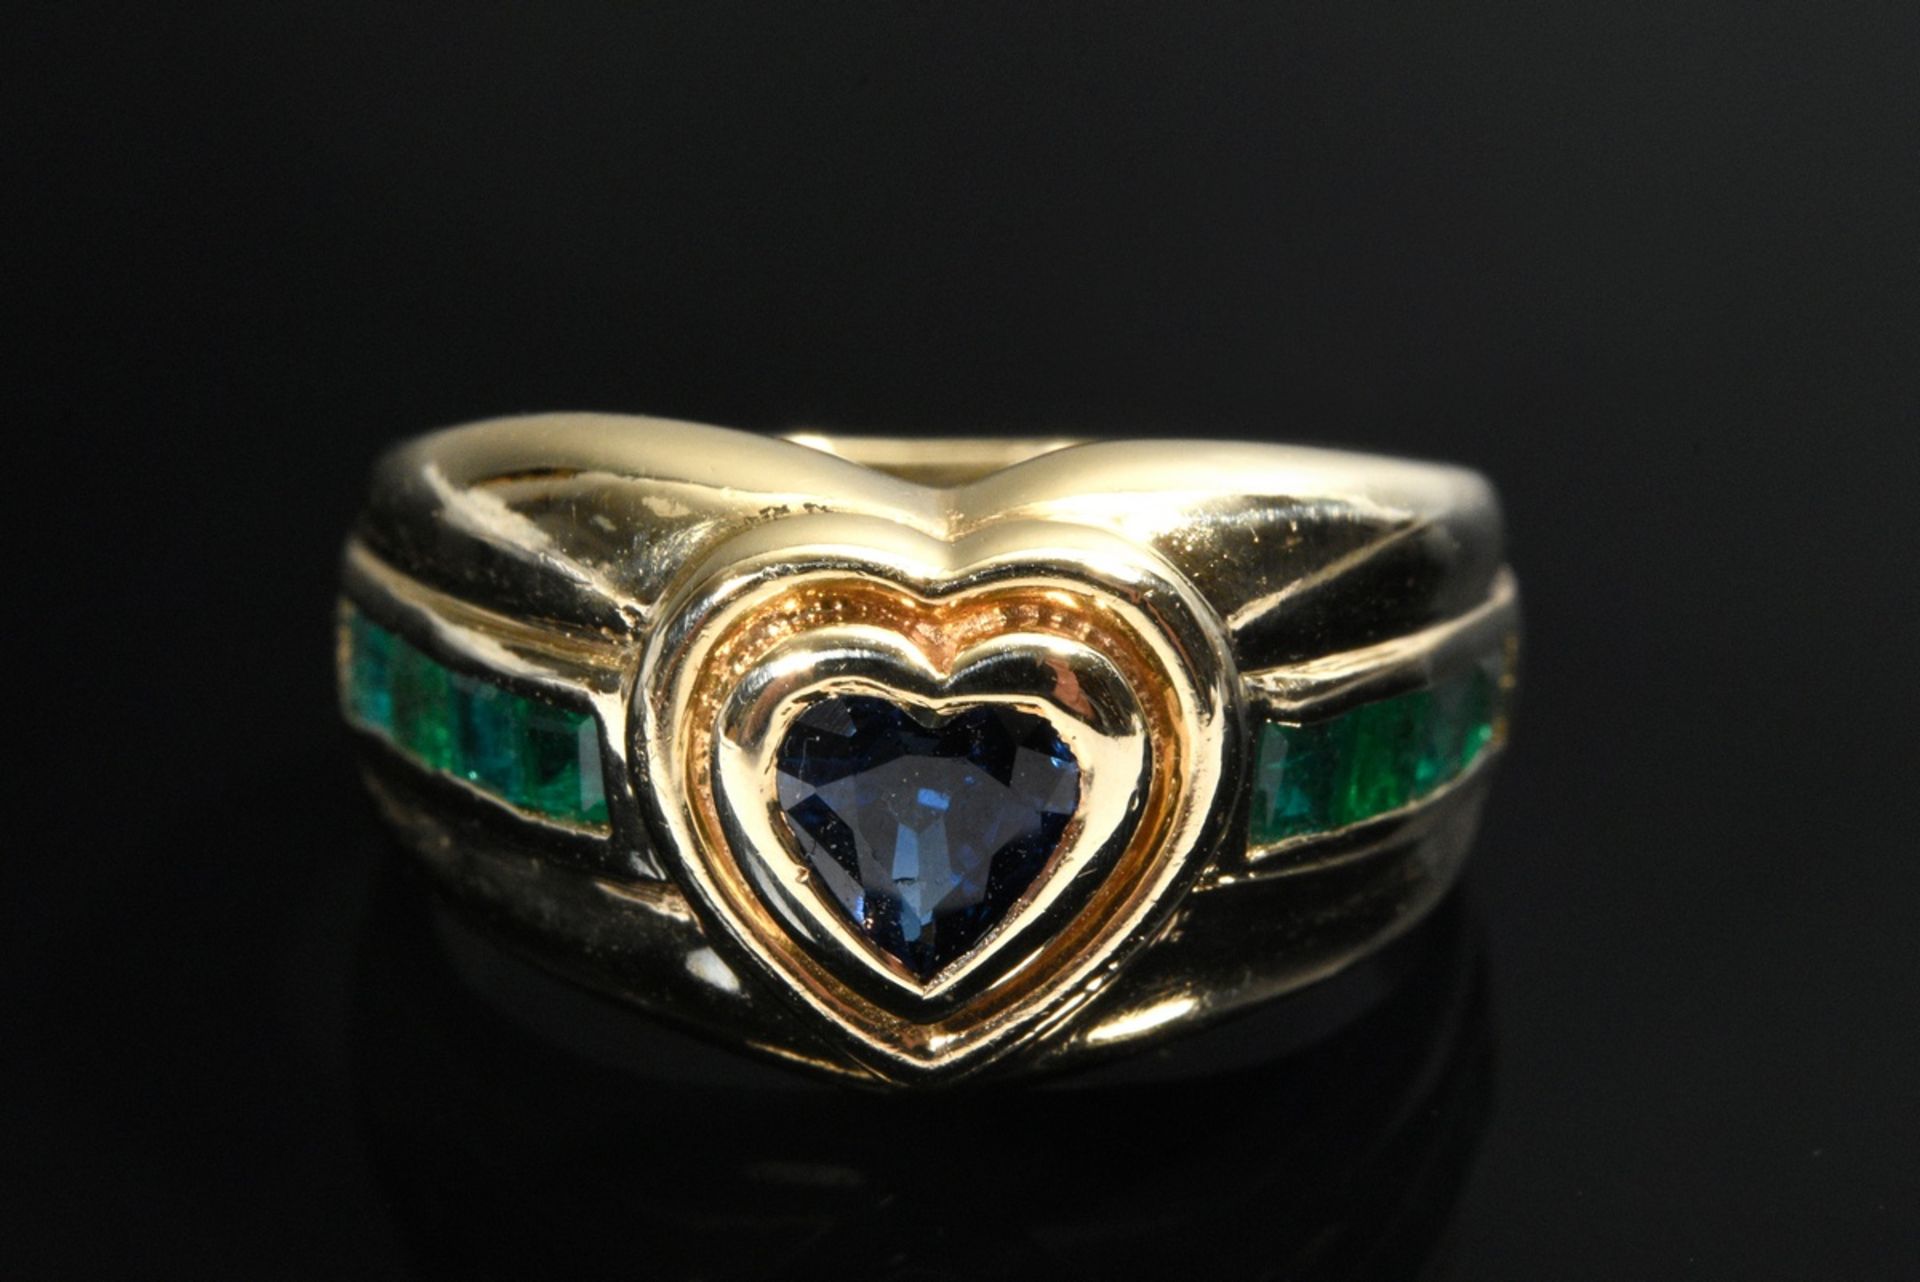 Yellow gold 585 band ring with sapphire heart and 8 emerald carrés, 4.6g, size 49 - Image 3 of 4